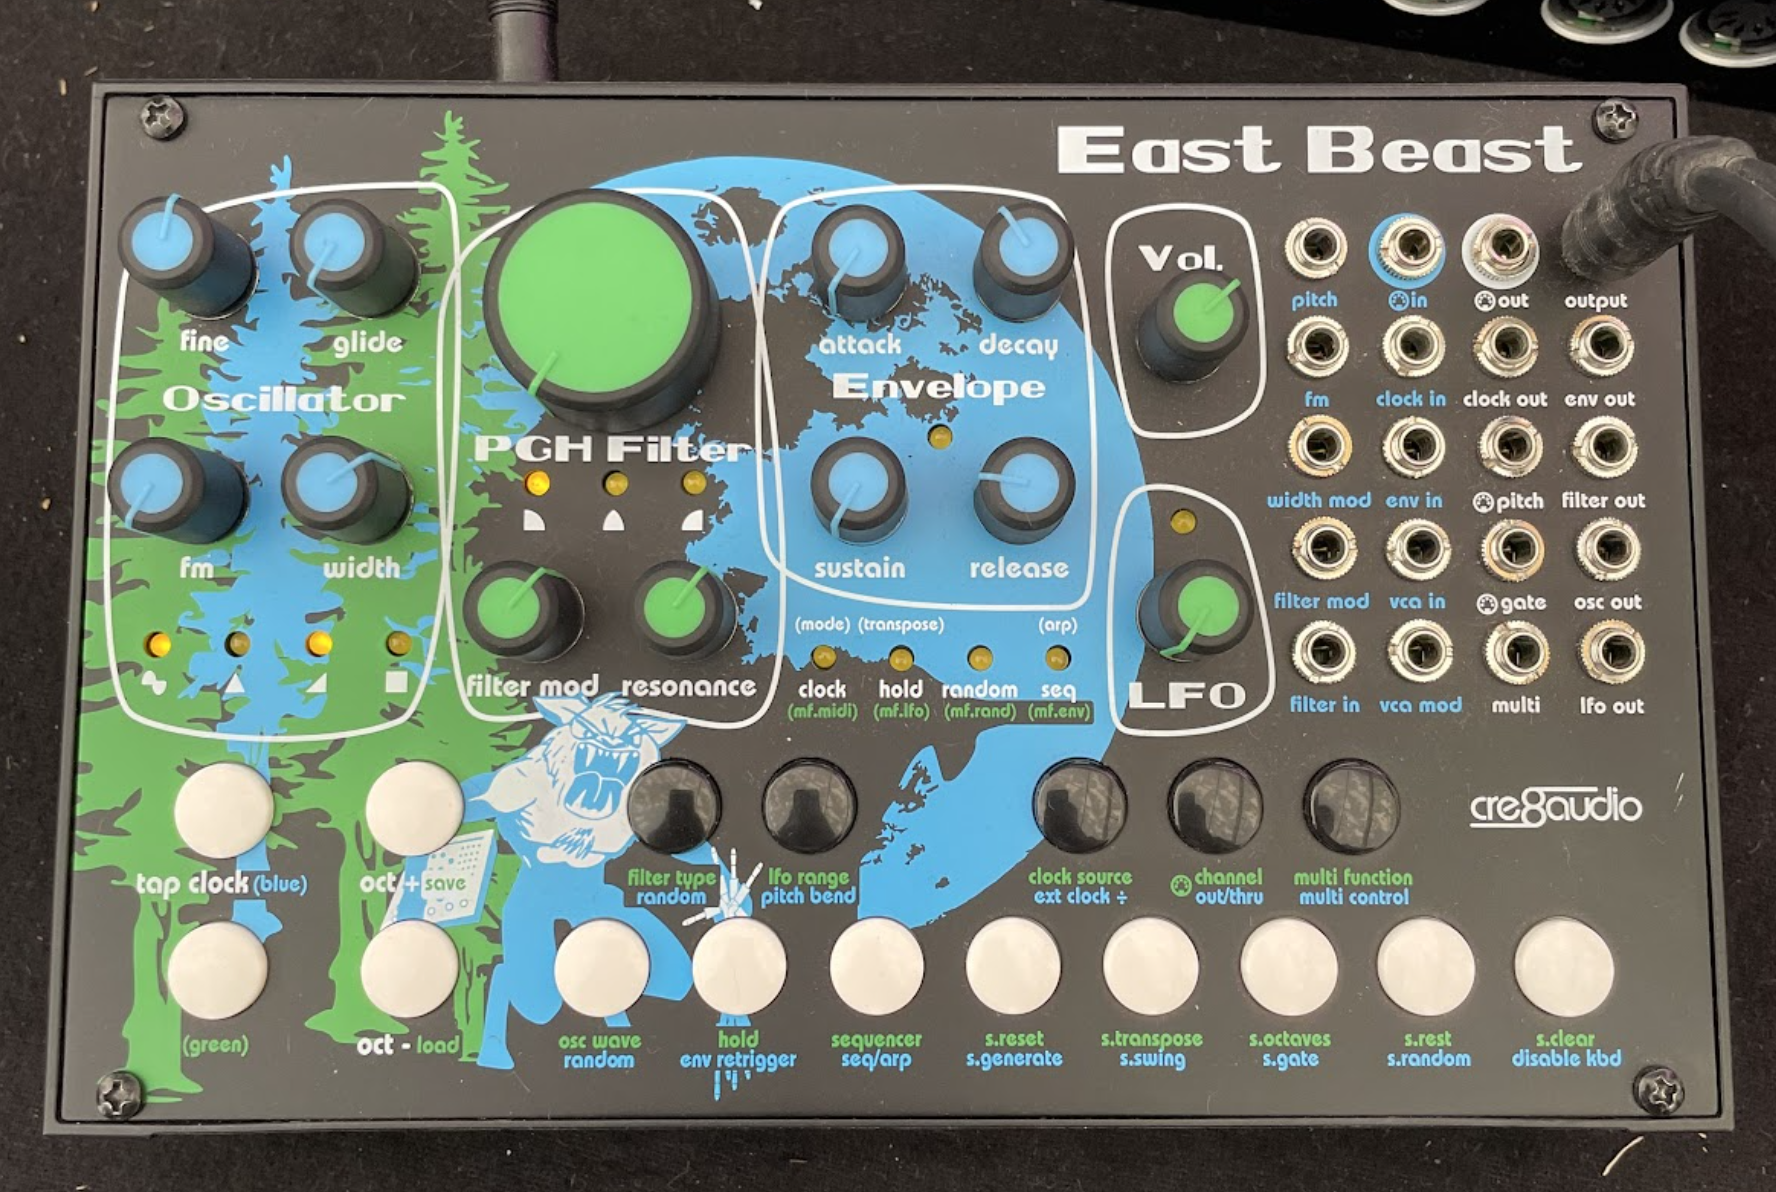 East Beast from Cre8audio